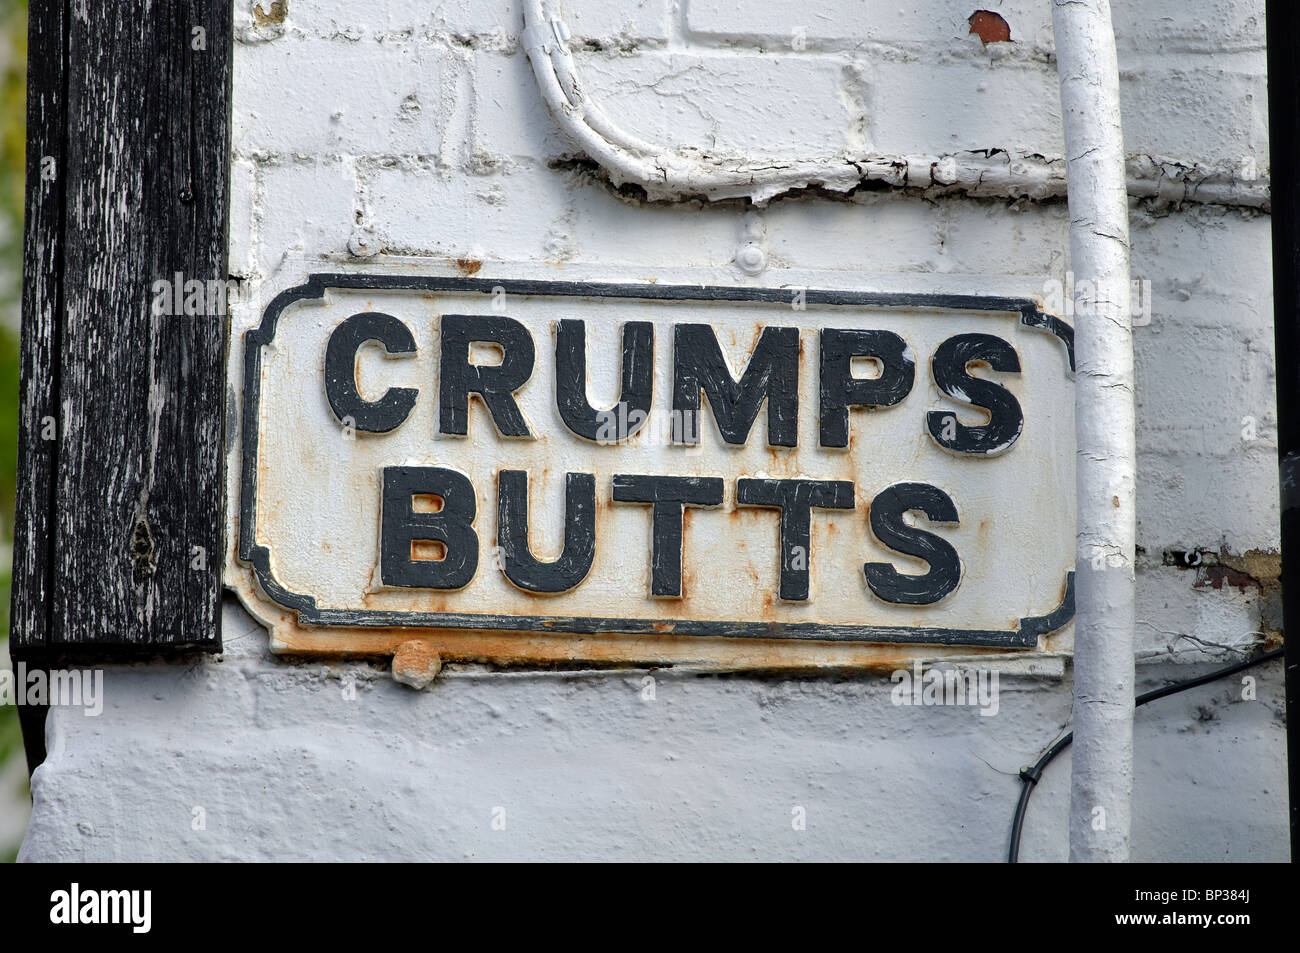 Crumps Butts street sign, Bicester, Oxfordshire, England, UK Stock Photo